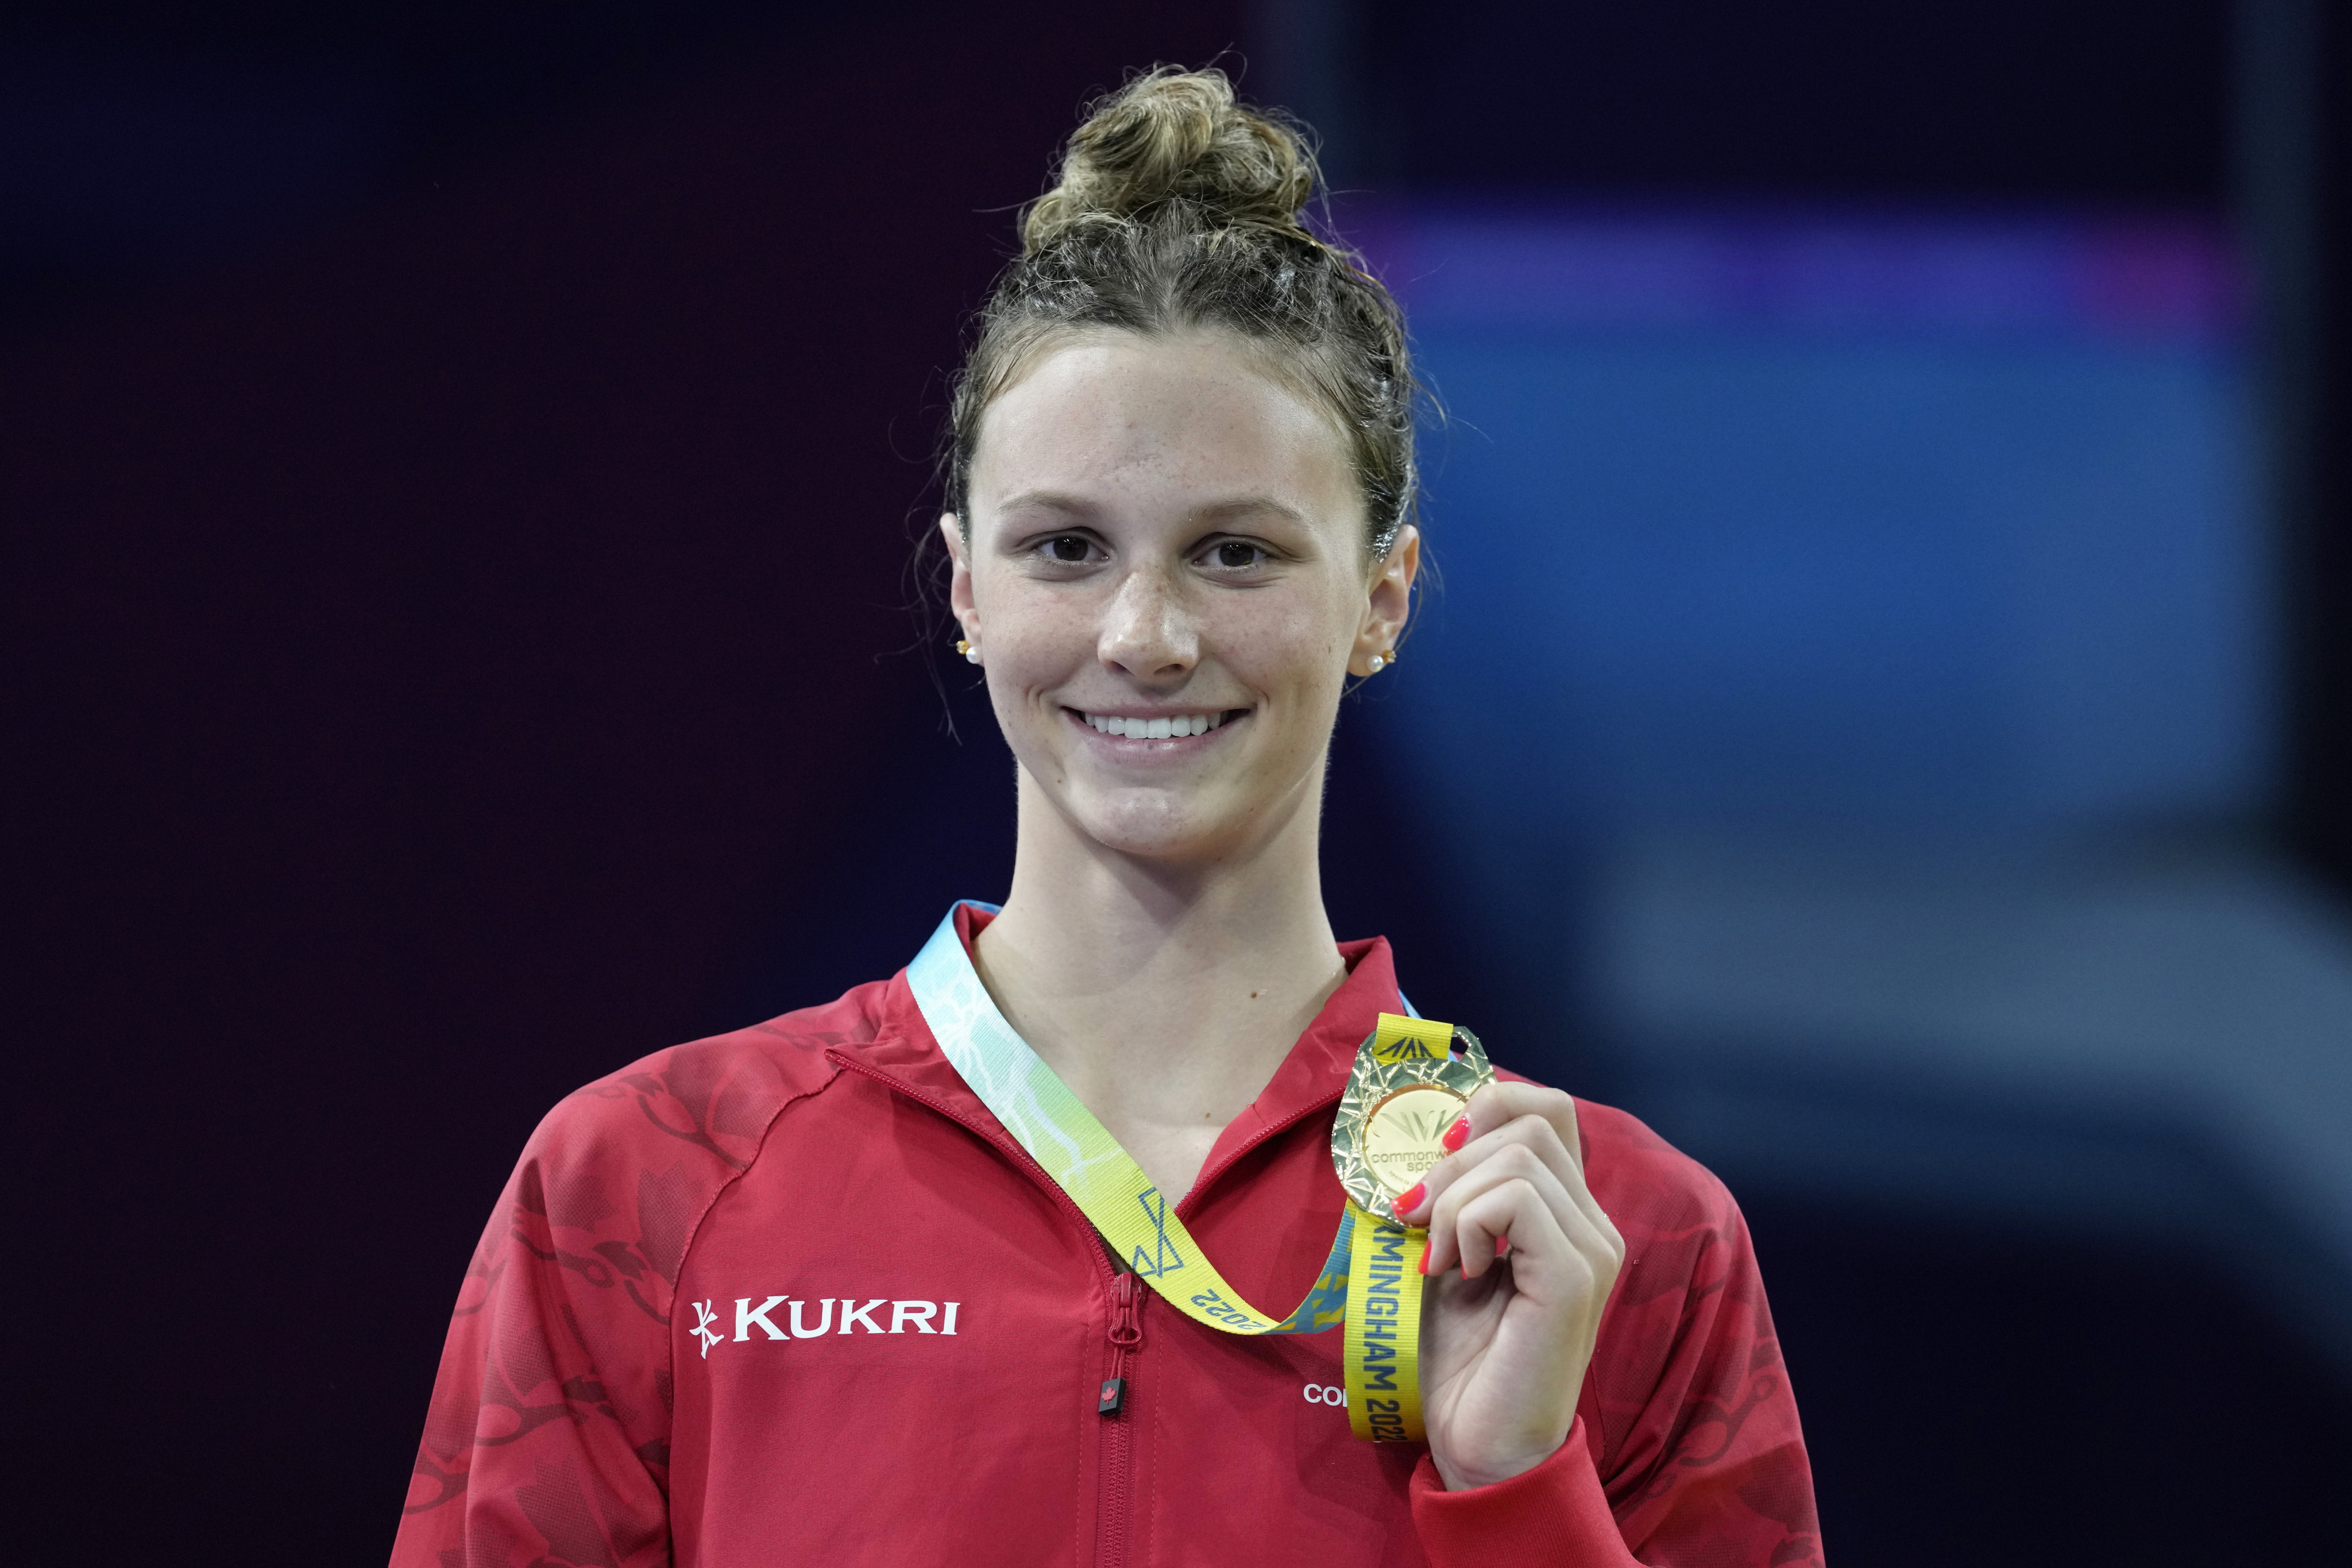 Gold medallist Summer McIntosh of Canada after winning the Women’s 400m individual medley at the Commonwealth Games in Birmingham. Photo: AP